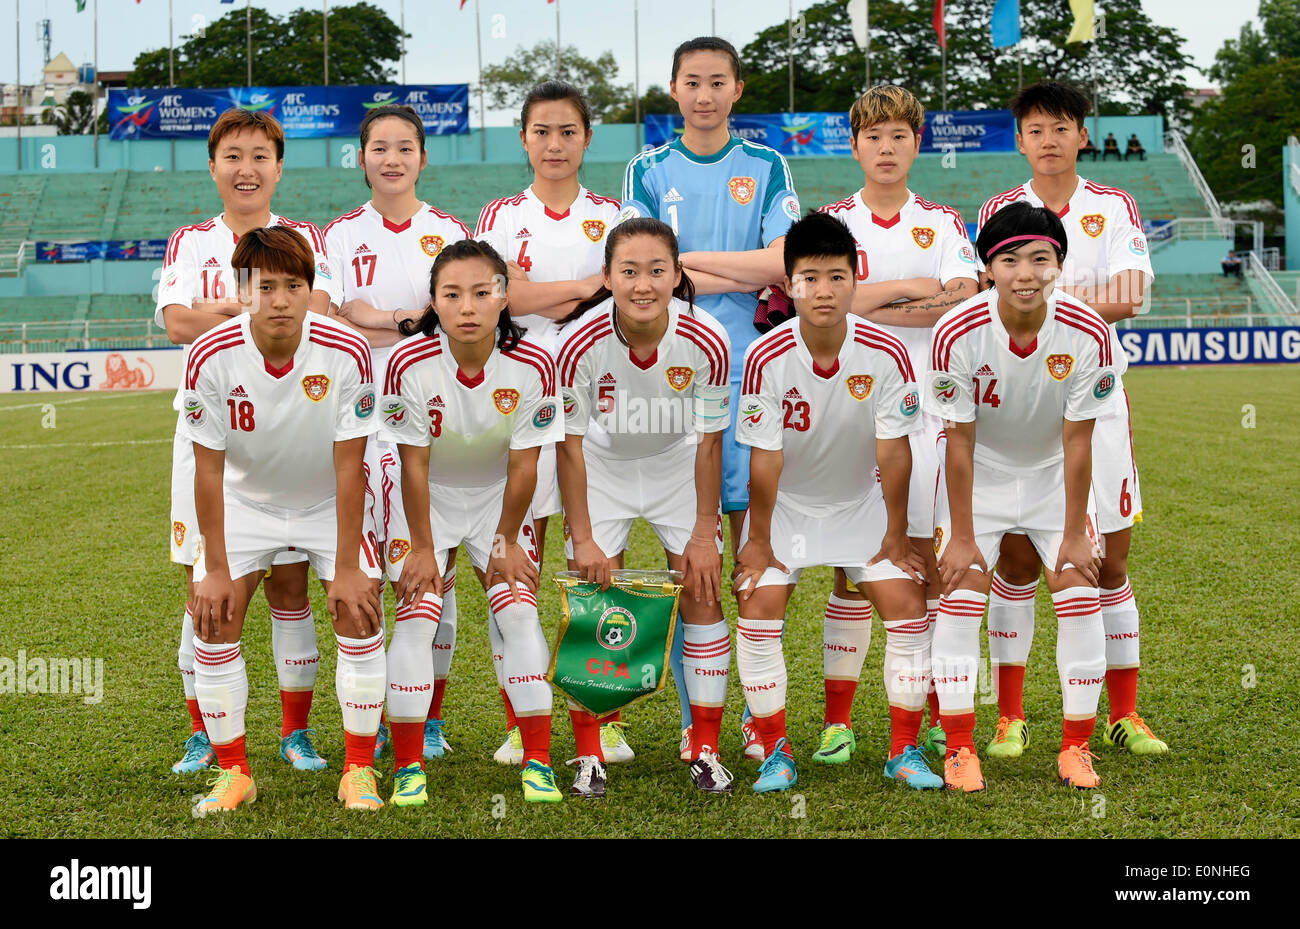 Ho Chi Minh, Vietnam. 17th May, 2014. Players of China pose for photos before the Group B match against Myanmar at the 2014 Women's AFC Cup held at Thong Nhat Stadium in Ho Chi Minh city, Vietnam, May 17, 2014. China advanced to World Cup 2015 after beating Myanmar 3-0. © He Jingjia/Xinhua/Alamy Live News Stock Photo